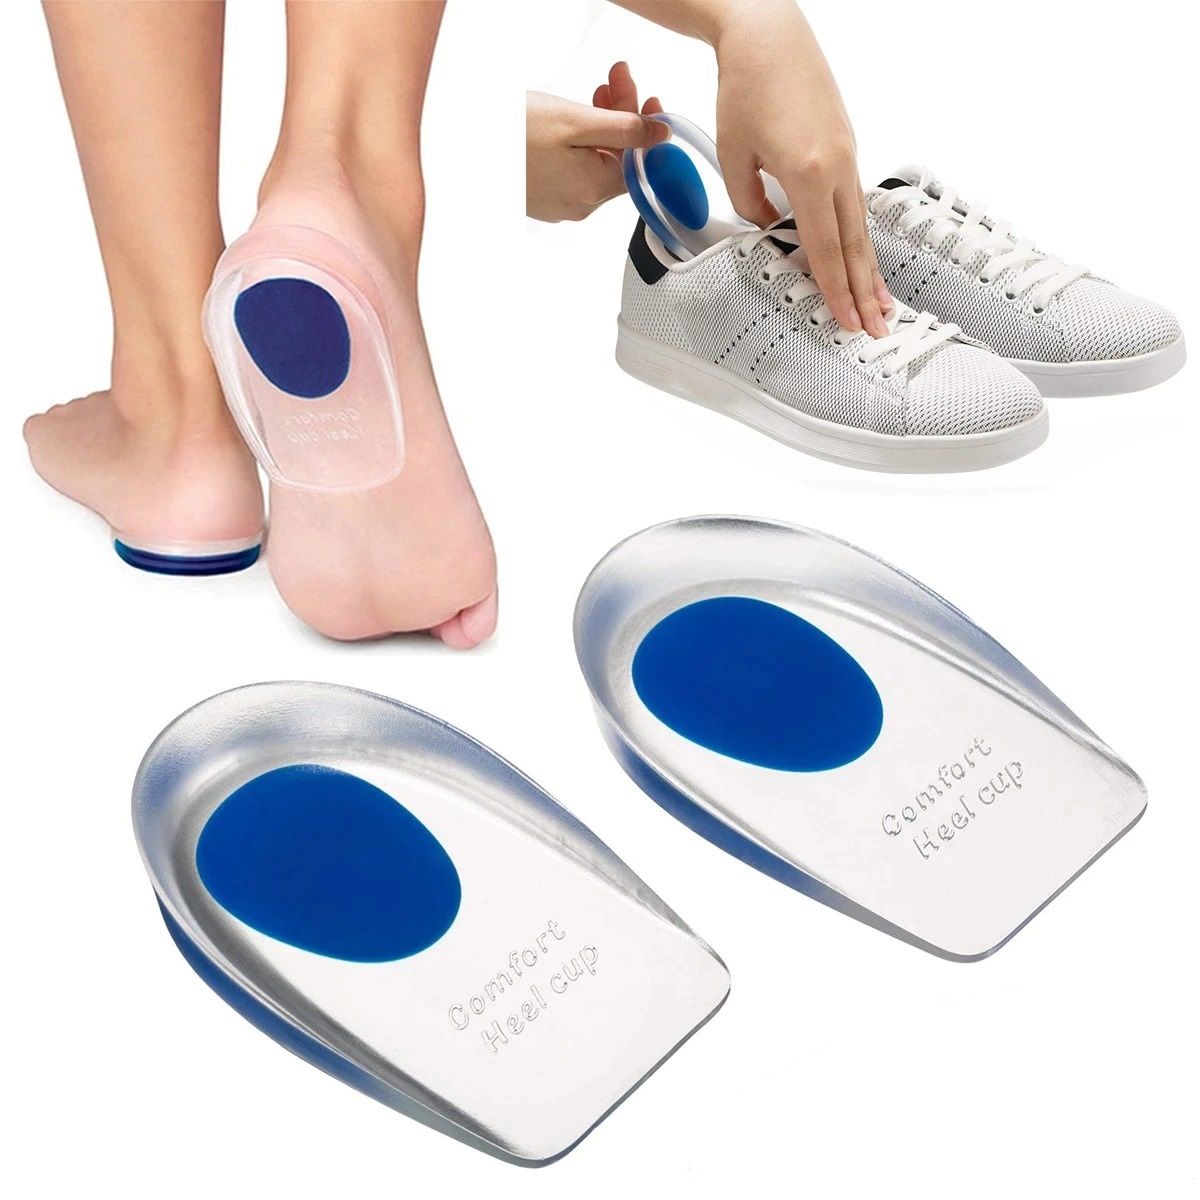 OCW Silicone Gel Heel Cups For Foot Pain Relief Shock Support Absorb